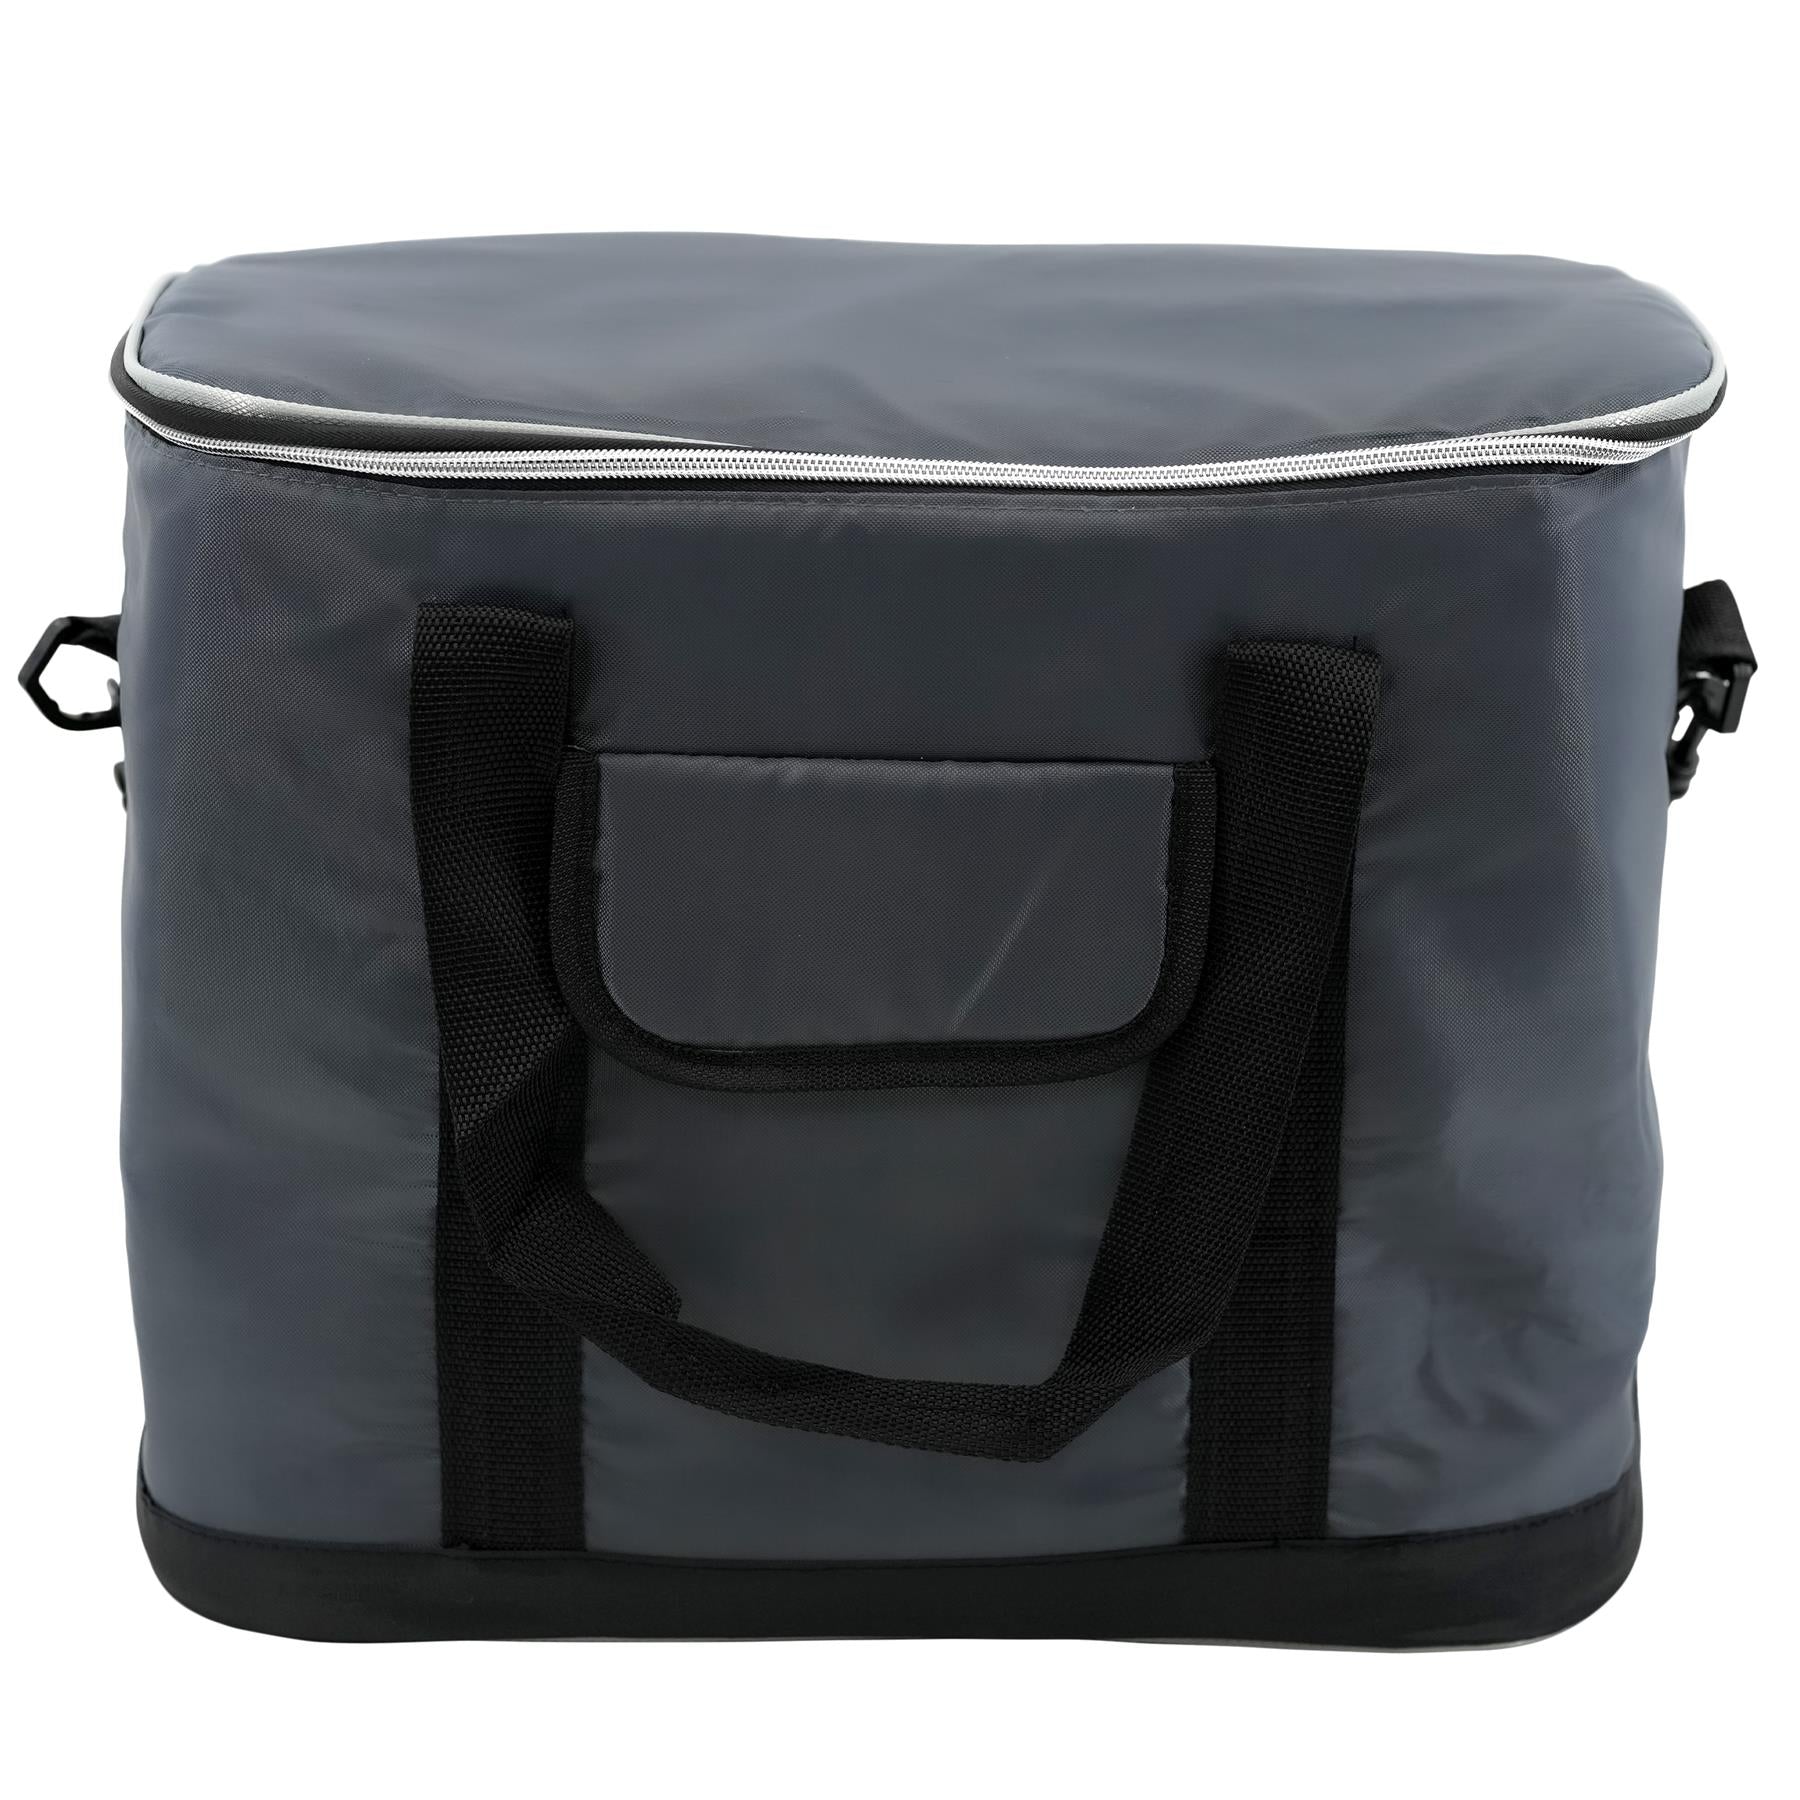 Extra Large 60 Can 30L Insulated Cool Bag Cooler Picnic Drinks Carrier Tote by Geezy - UKBuyZone